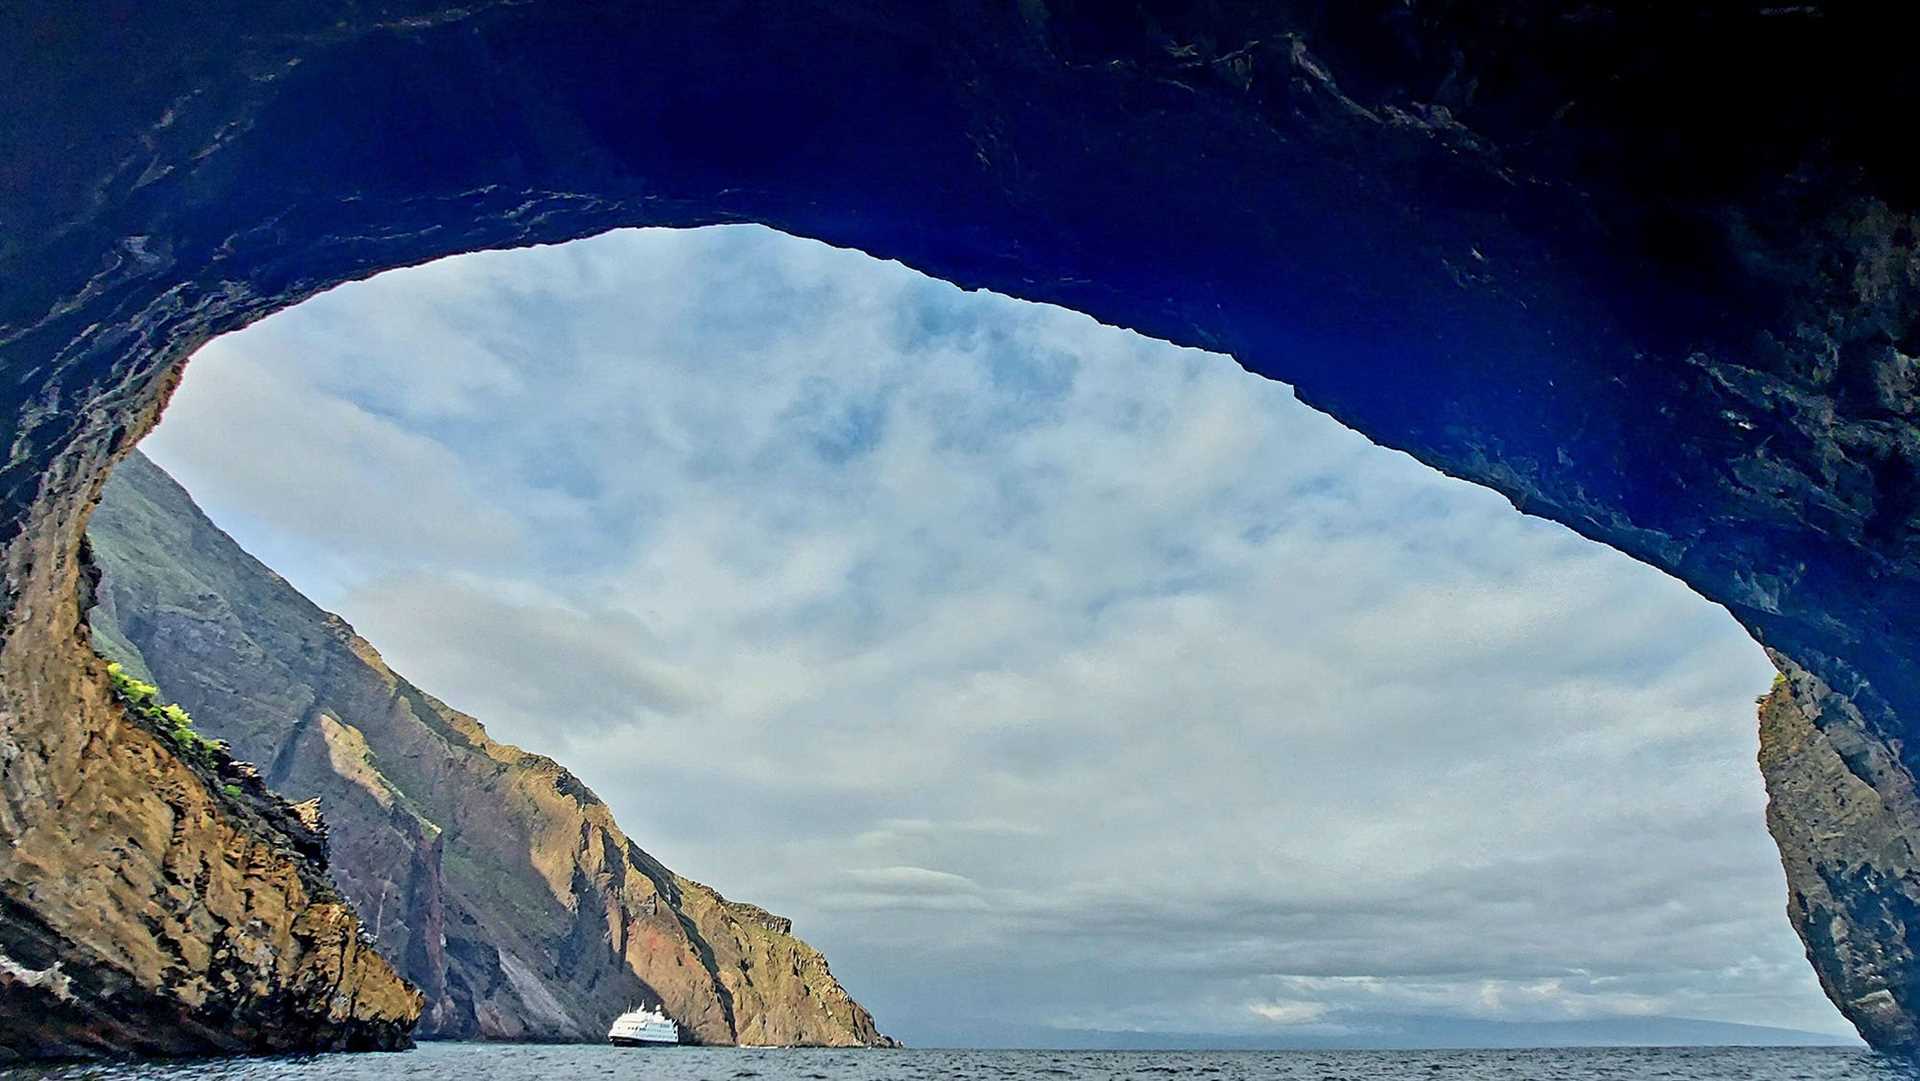 view of National Geographic Endeavour II from inside a large natural cave on the beach